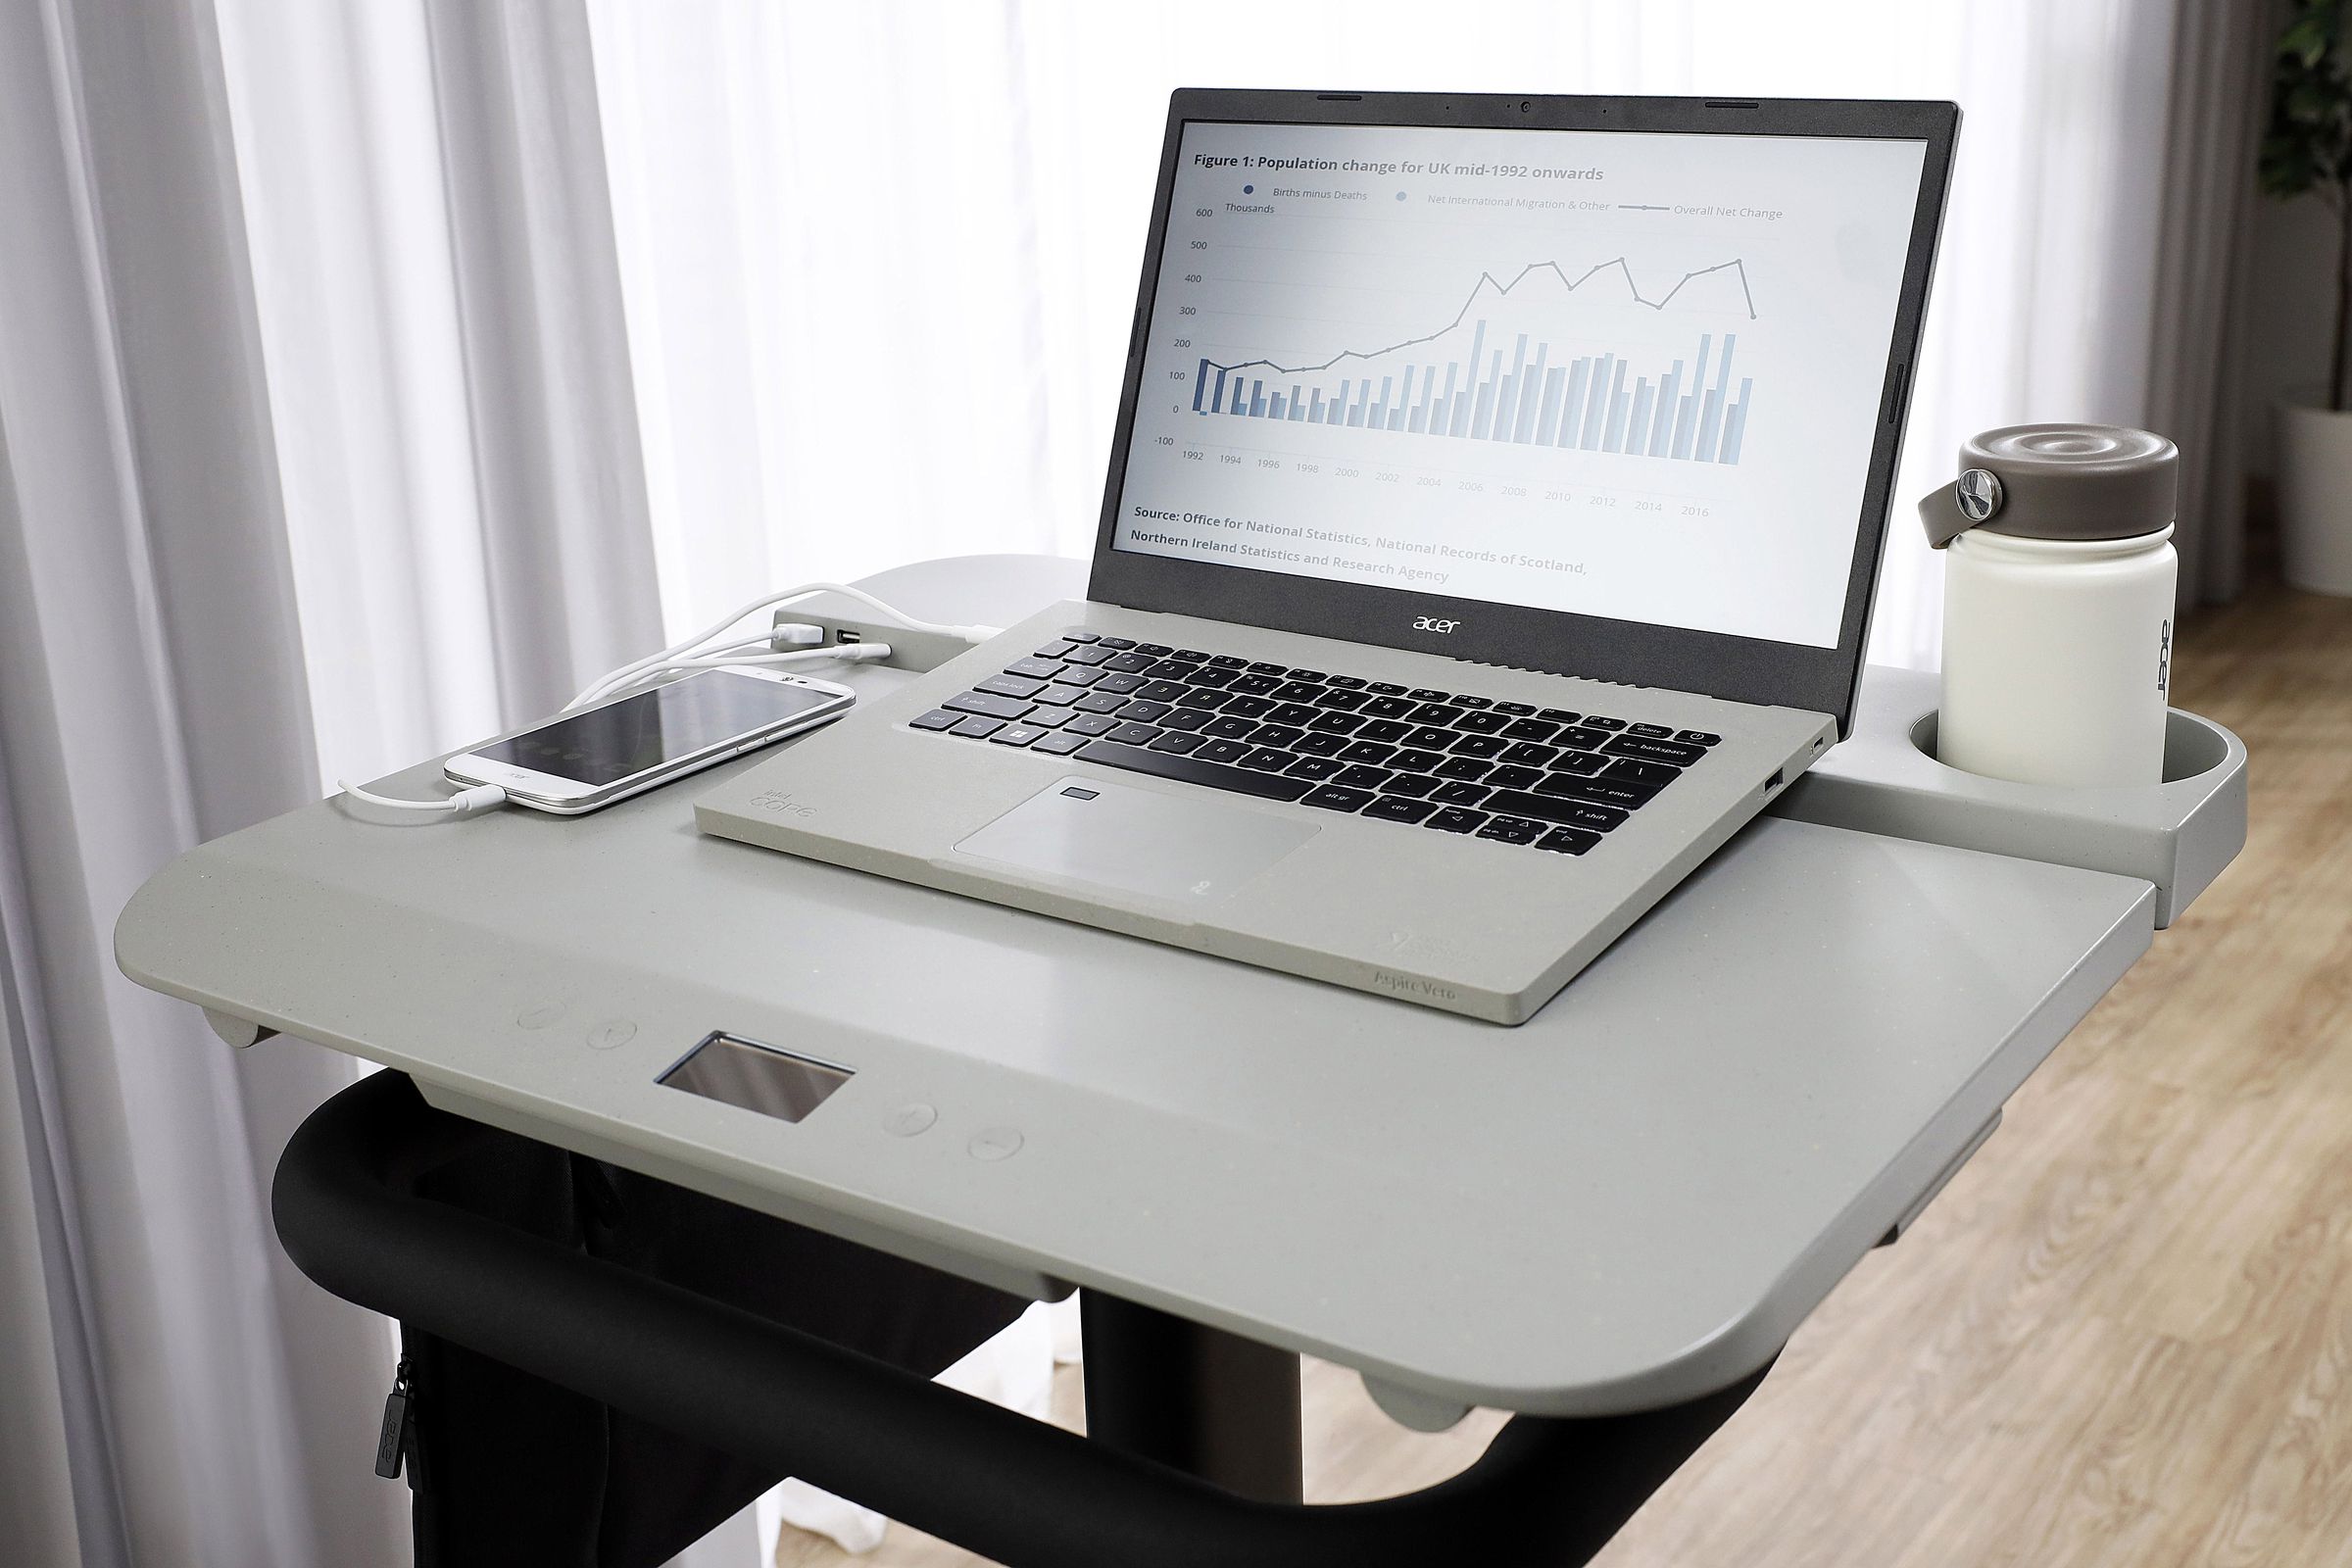 The desktop of the Acer eKinekt BD 3 bicycle desk, showing a laptops, phone, mug, and a portable power bank on it.